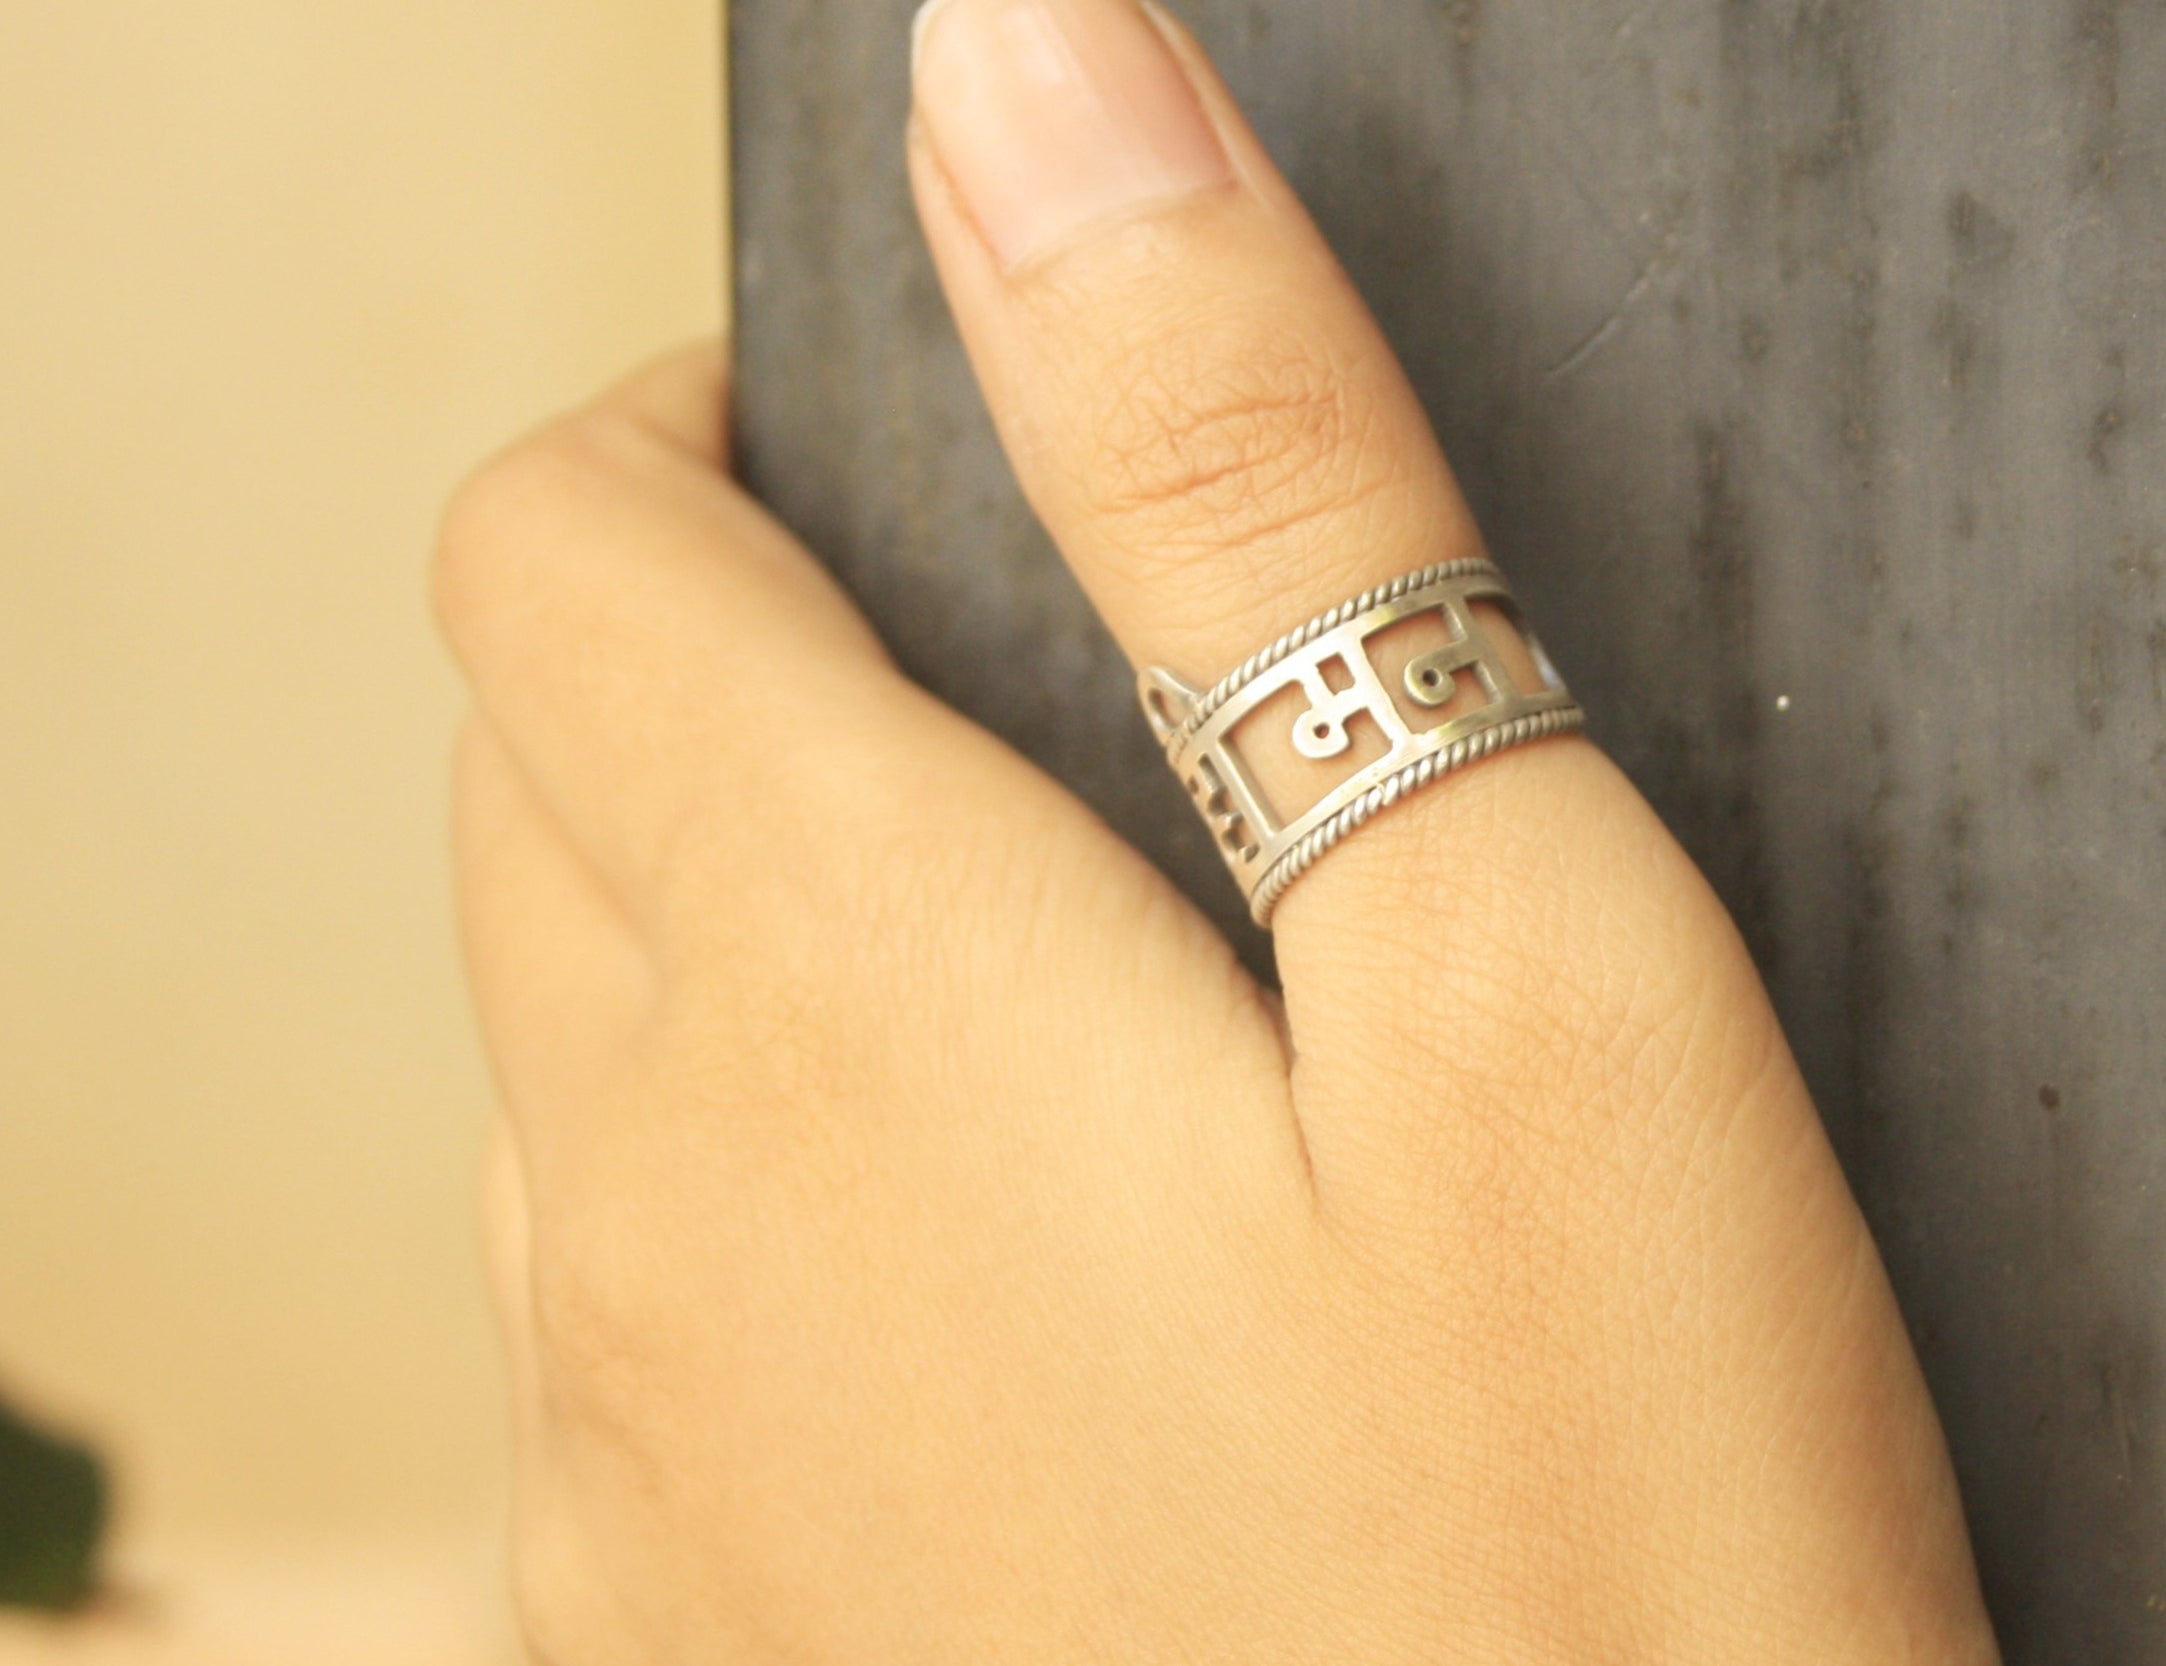 Explore the Quirksmith Vidrohi Man Thumb Ring - As seen on Shark Tank India Season 3. Handcrafted in 92.5 silver.